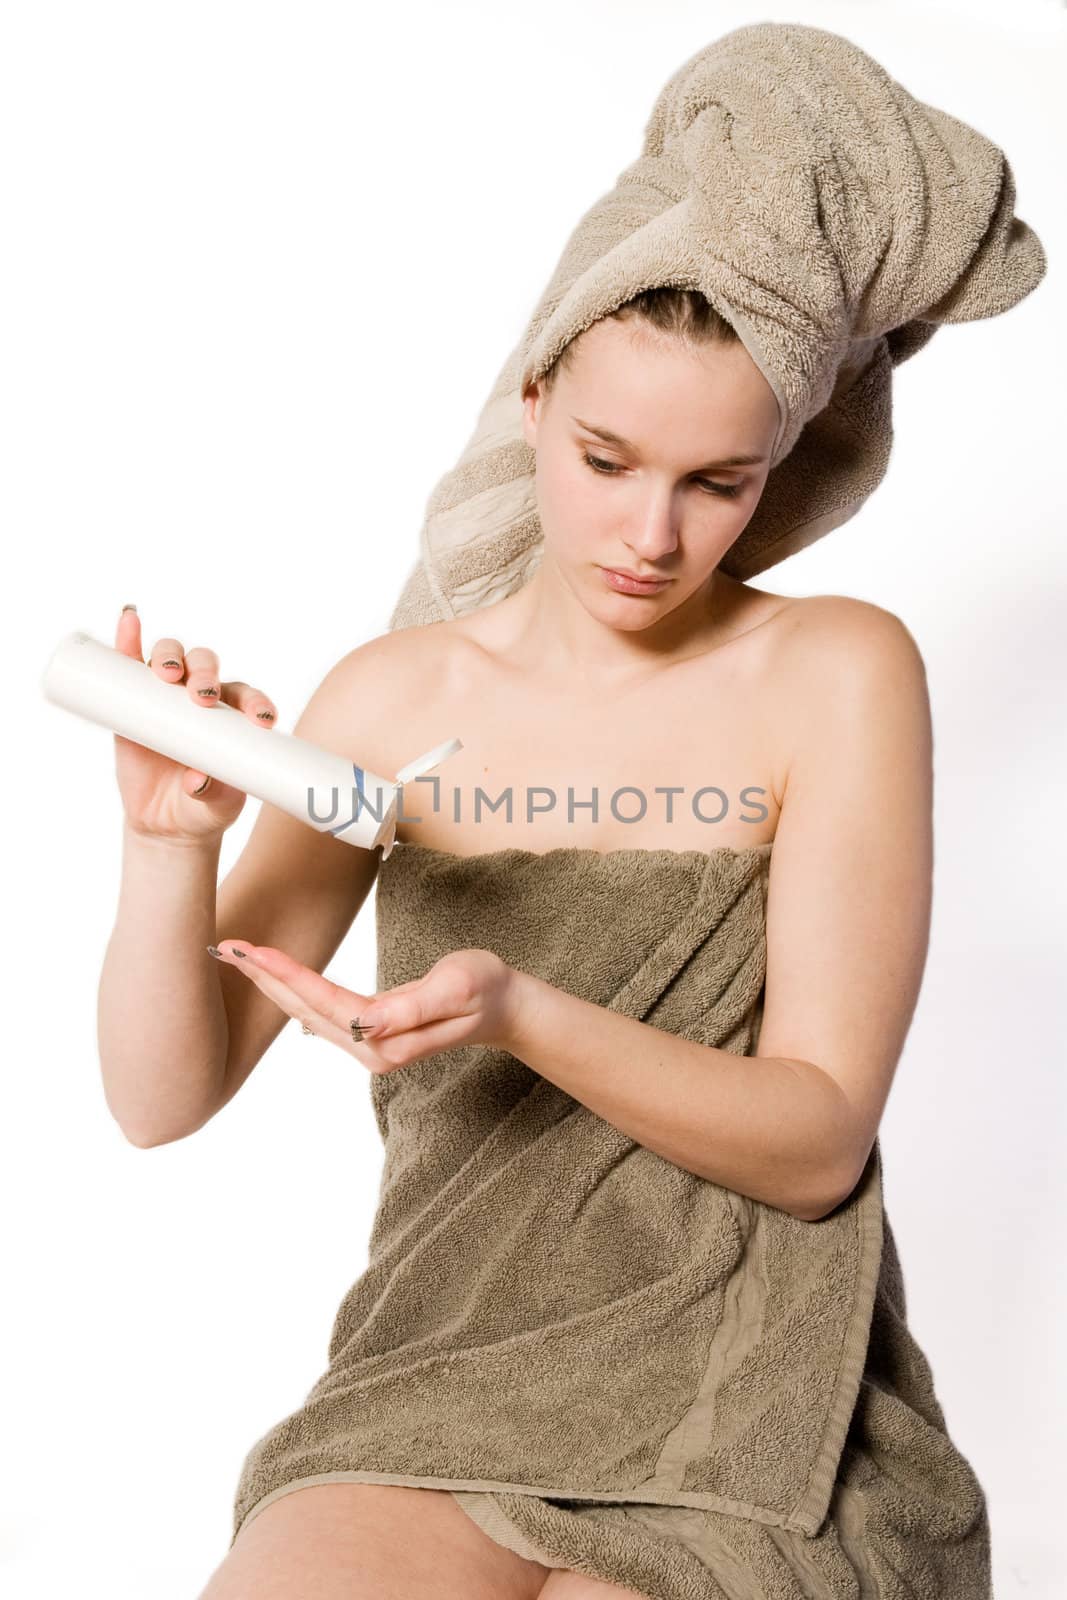 Young woman in towel on a white background with some moisterizer